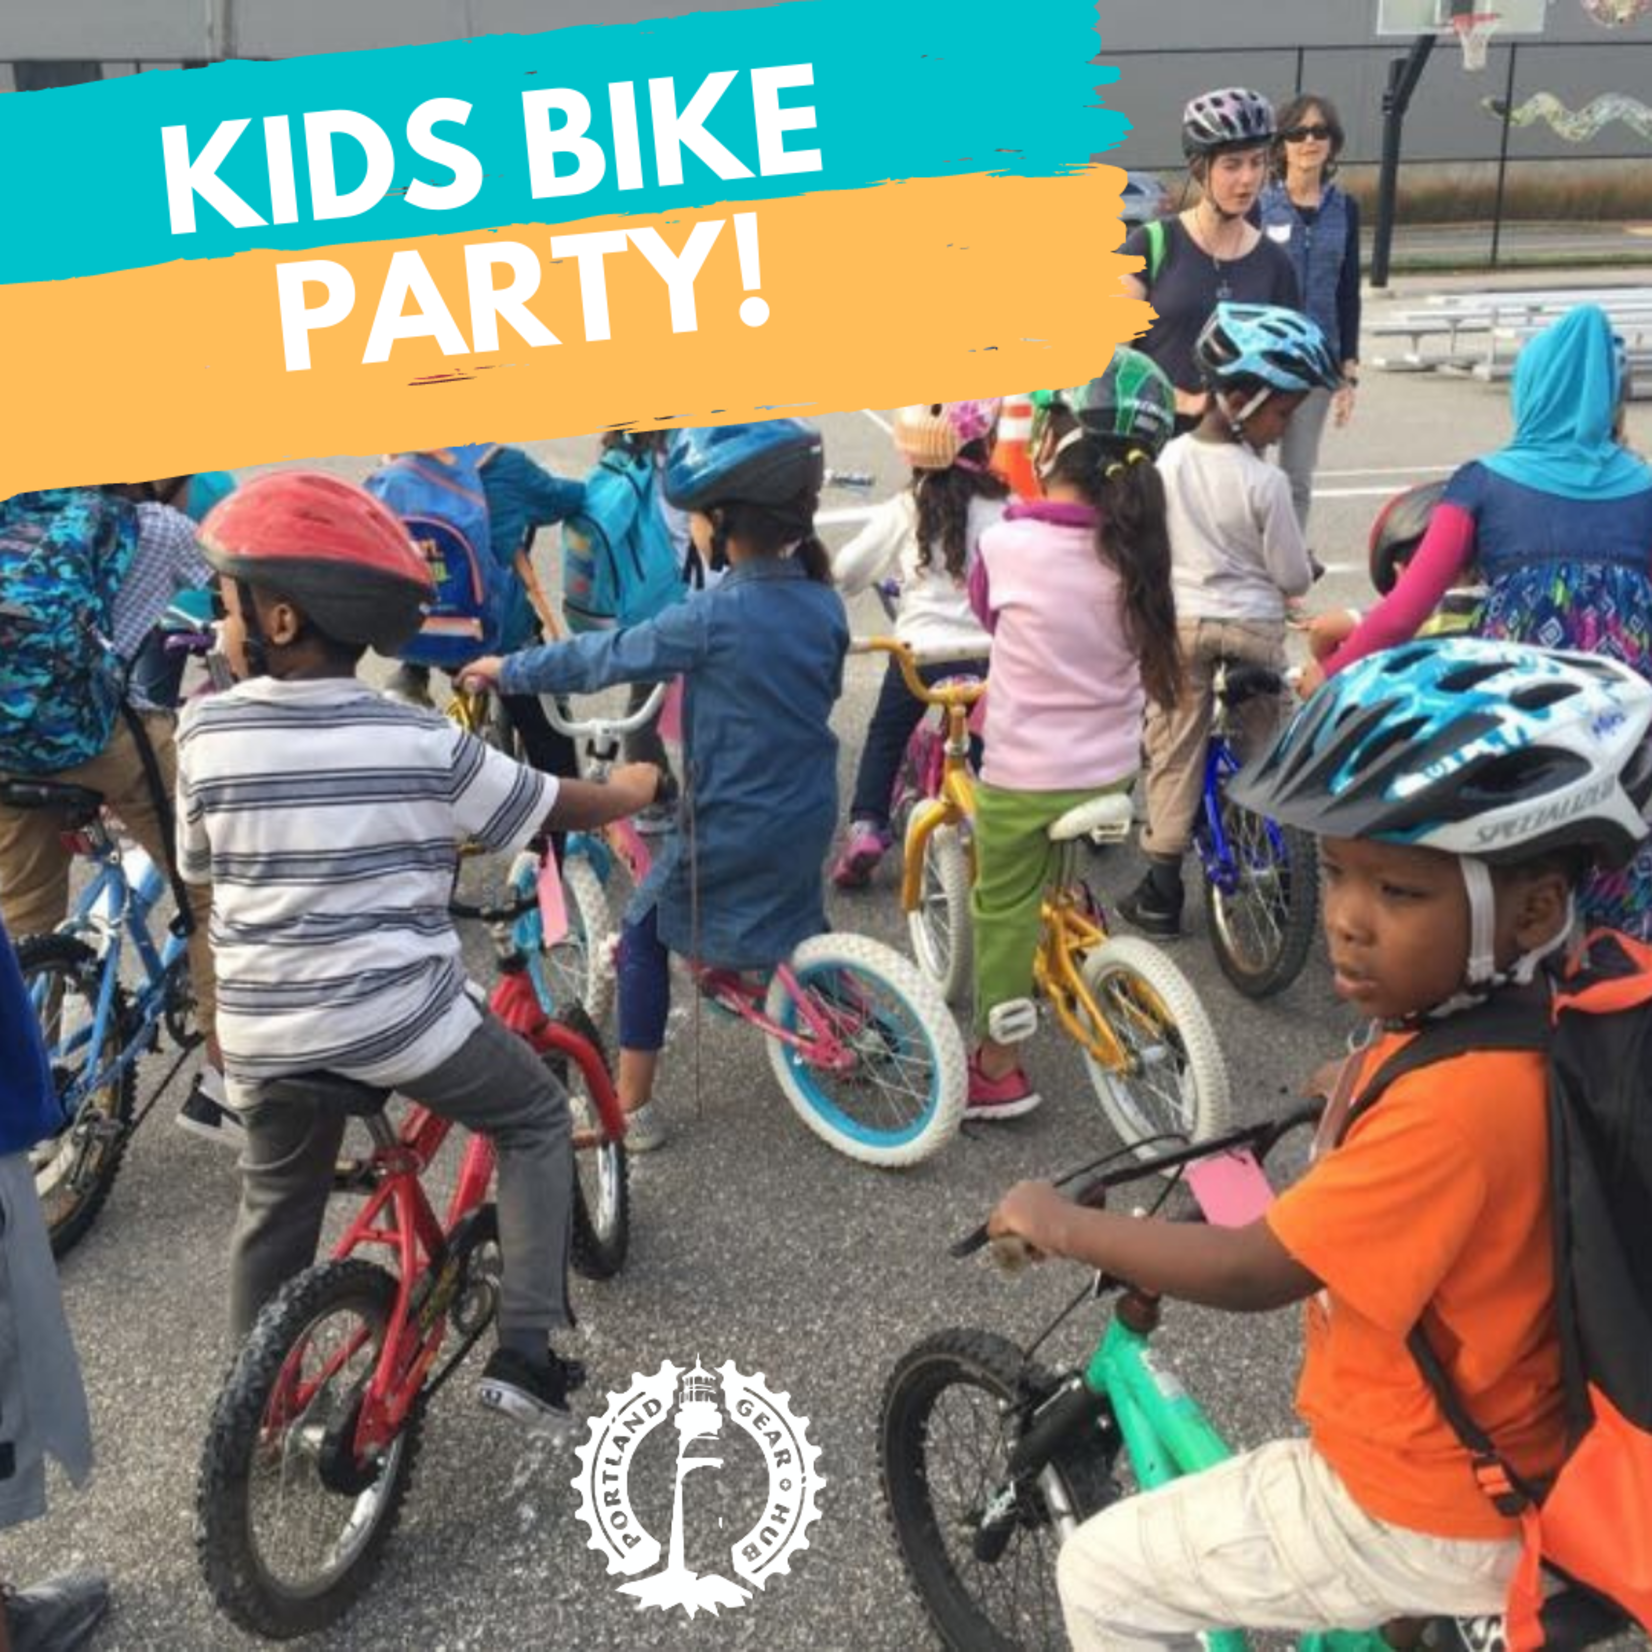 Kids Bike Party: August 7, 10:00am -1:00pm